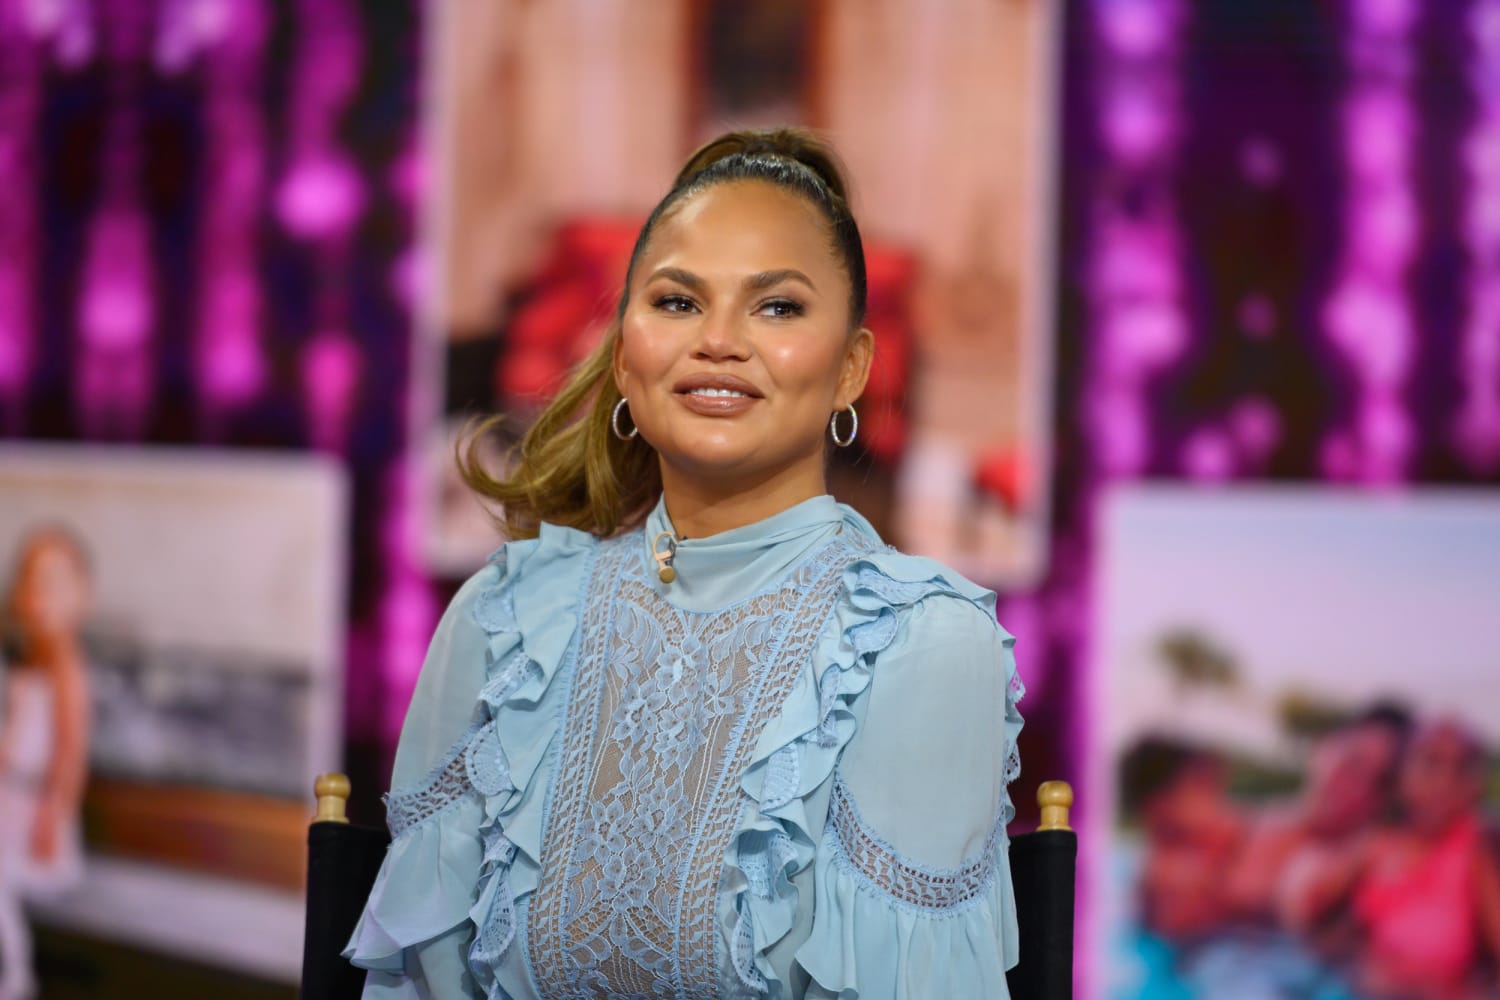 Chrissy Teigen addresses cyberbullying accusations in first TV interview since controversy